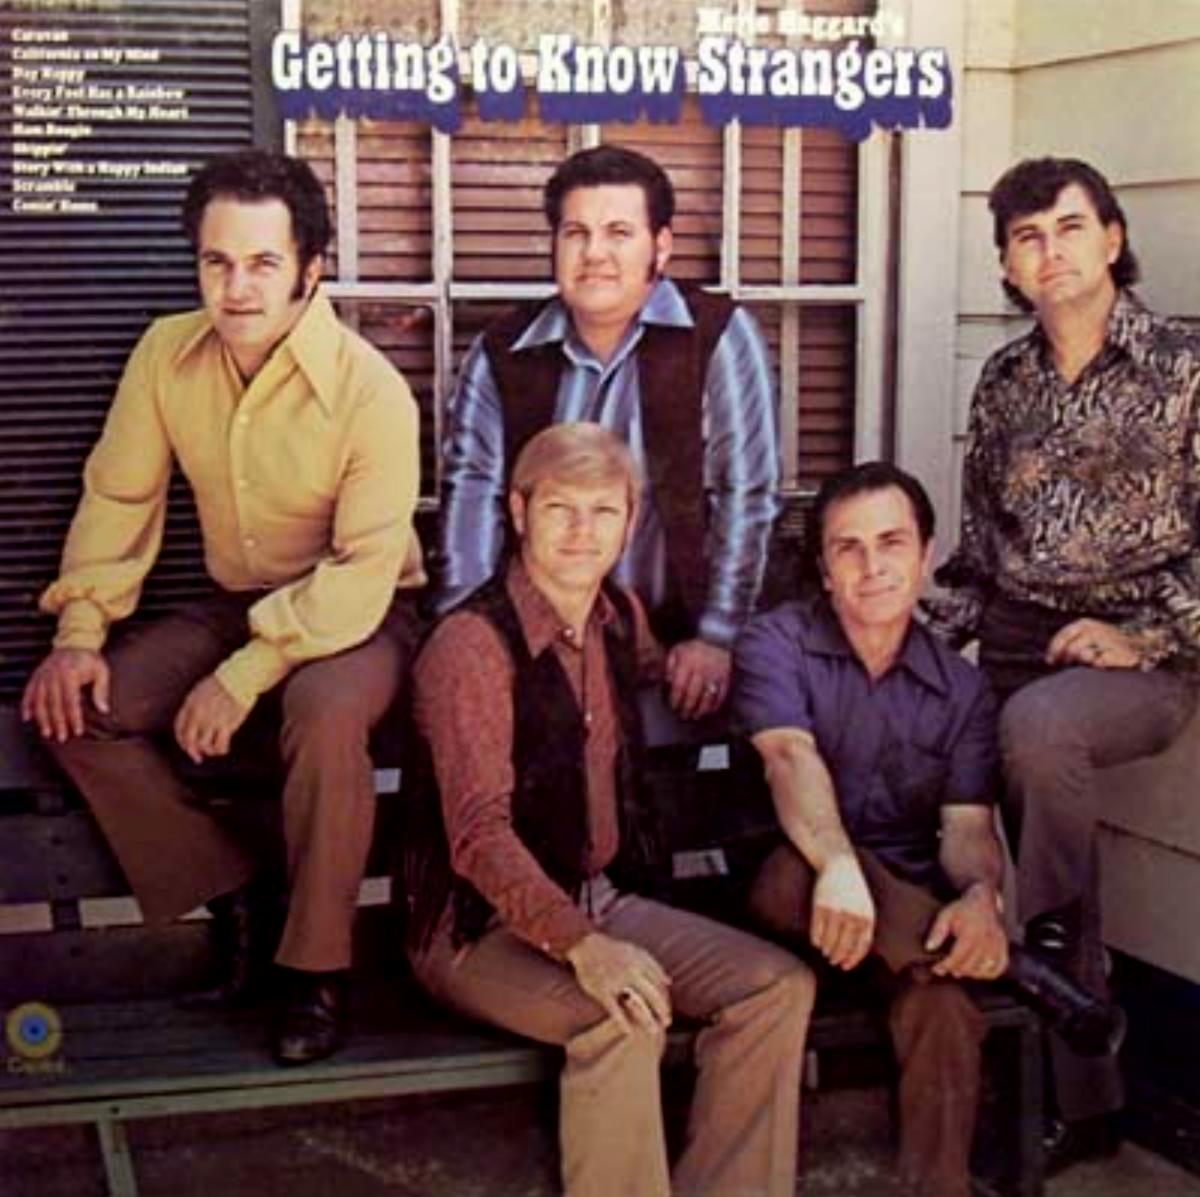 Merle Haggard's 1970 Album Getting To Know The Strangers